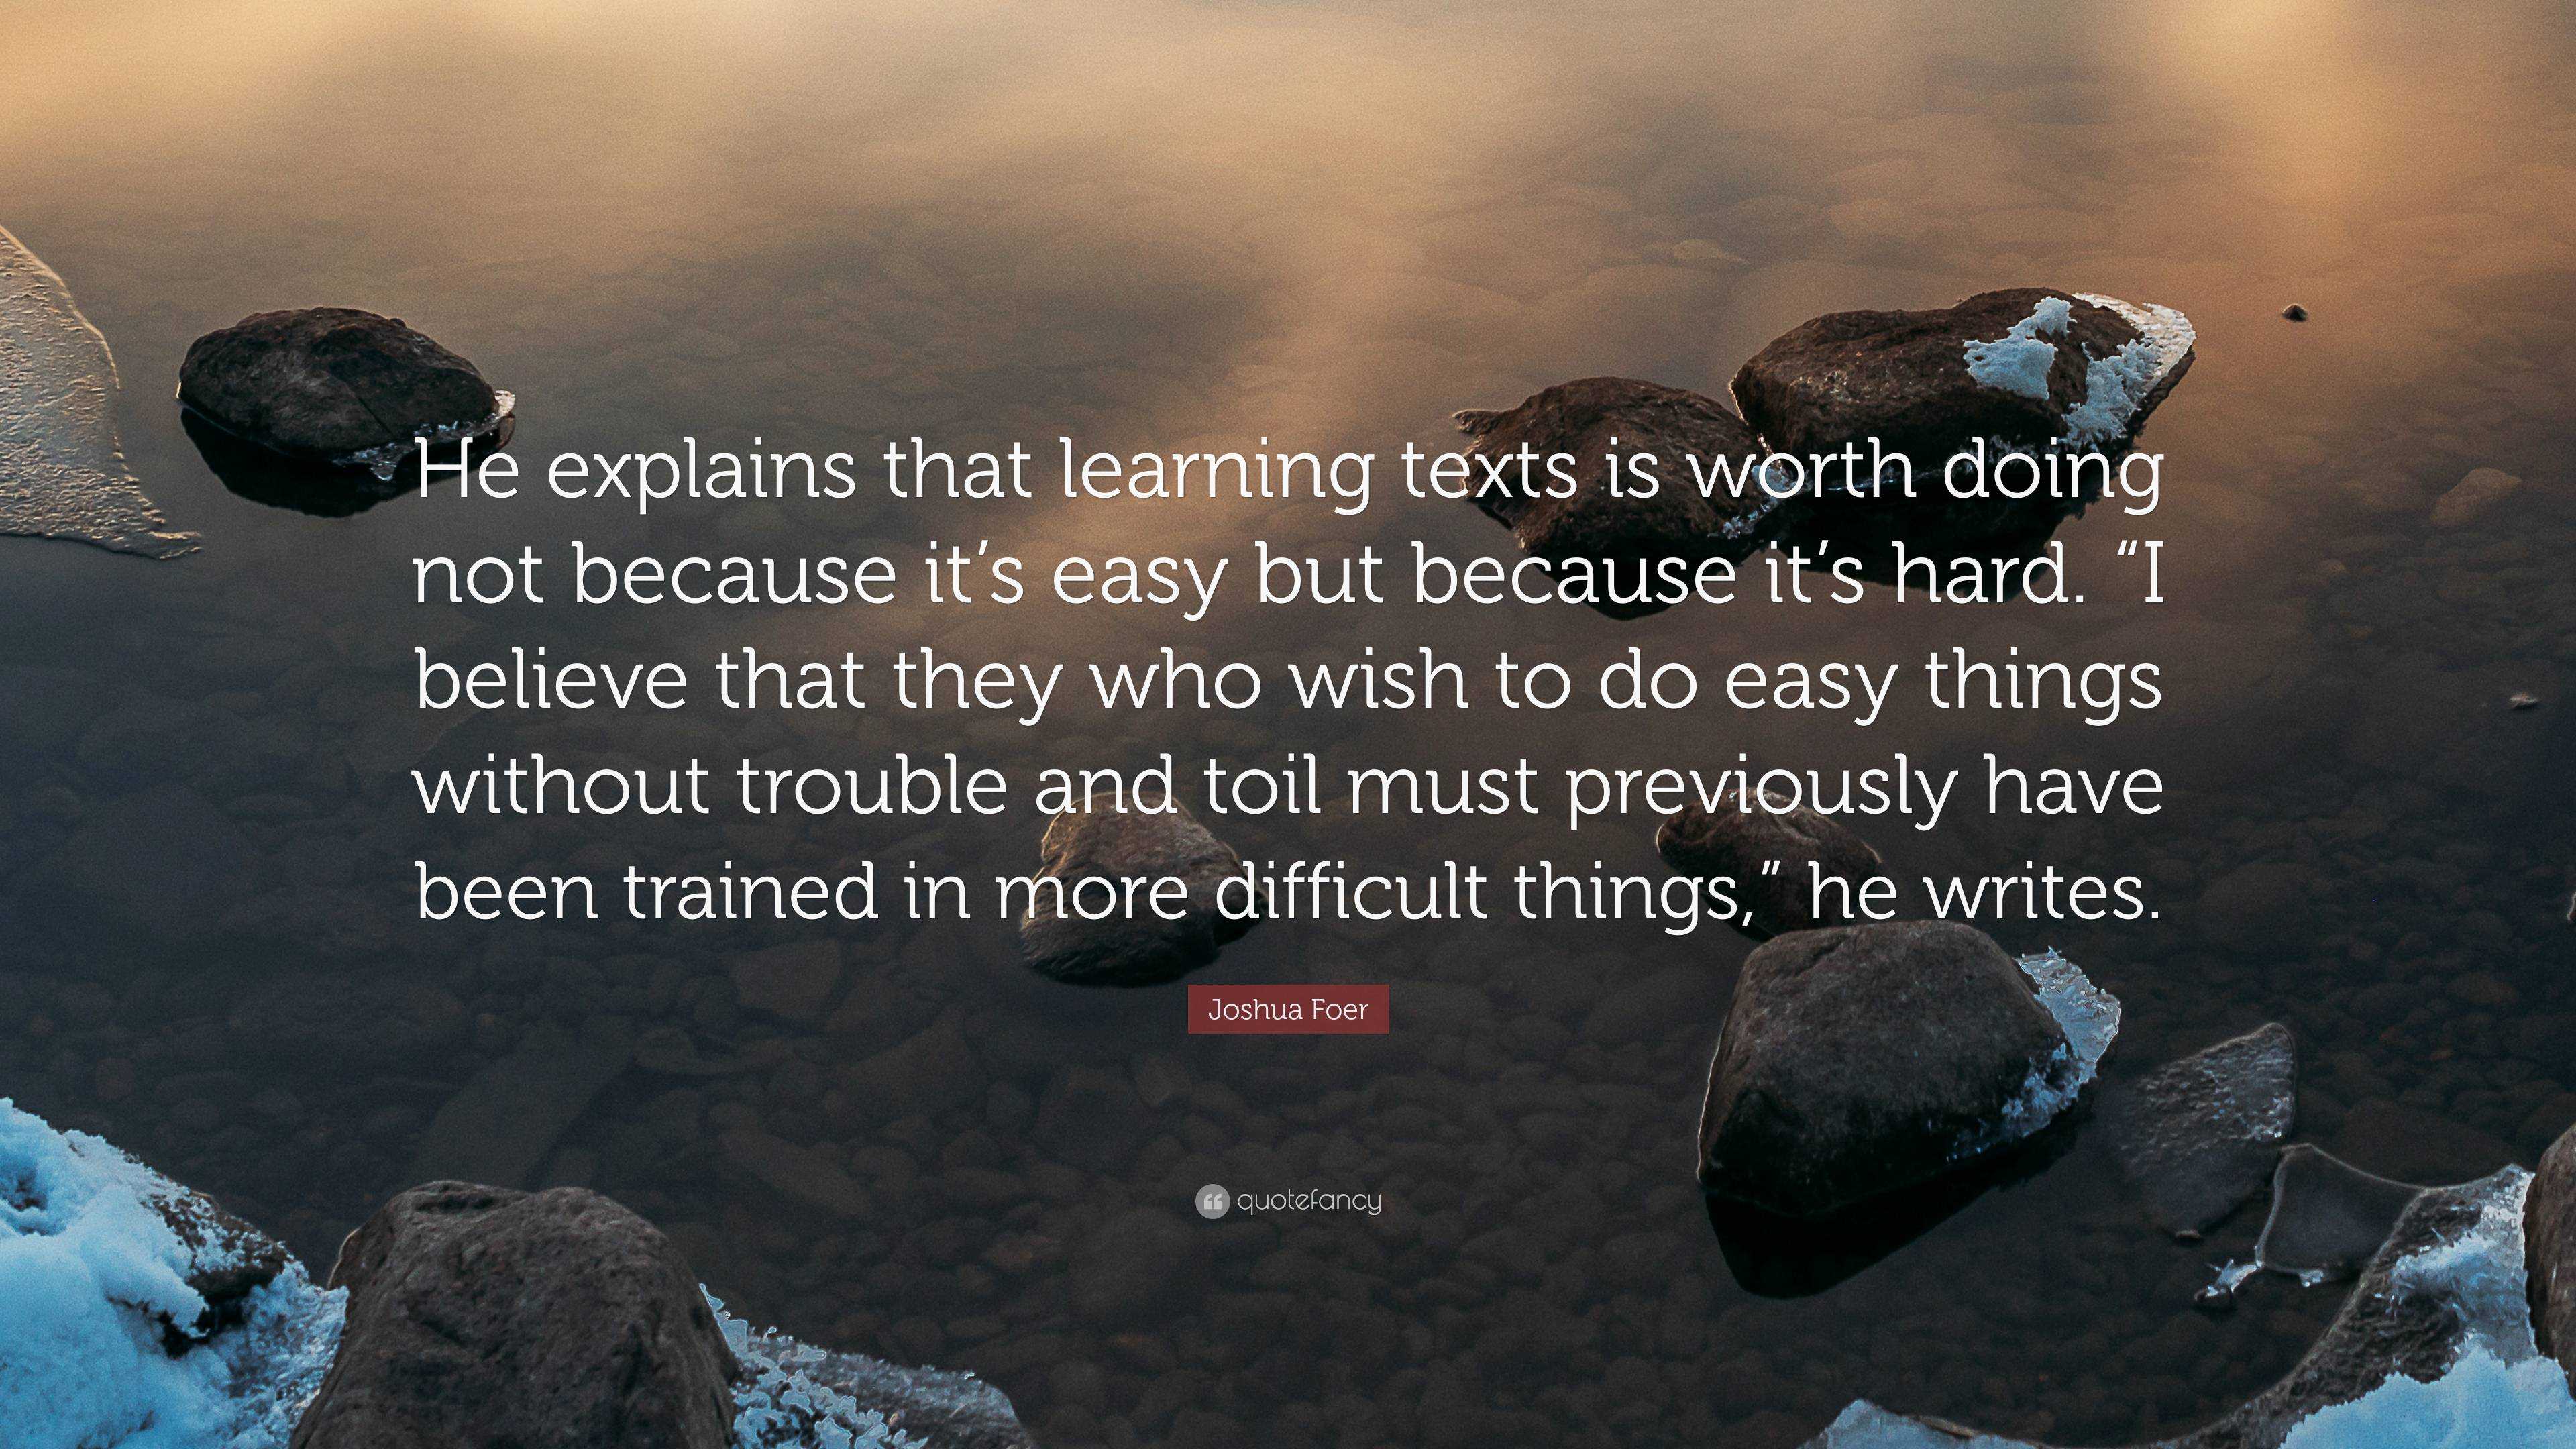 Joshua Foer Quote He Explains That Learning Texts Is Worth Doing Not Because It S Easy But Because It S Hard I Believe That They Who Wis